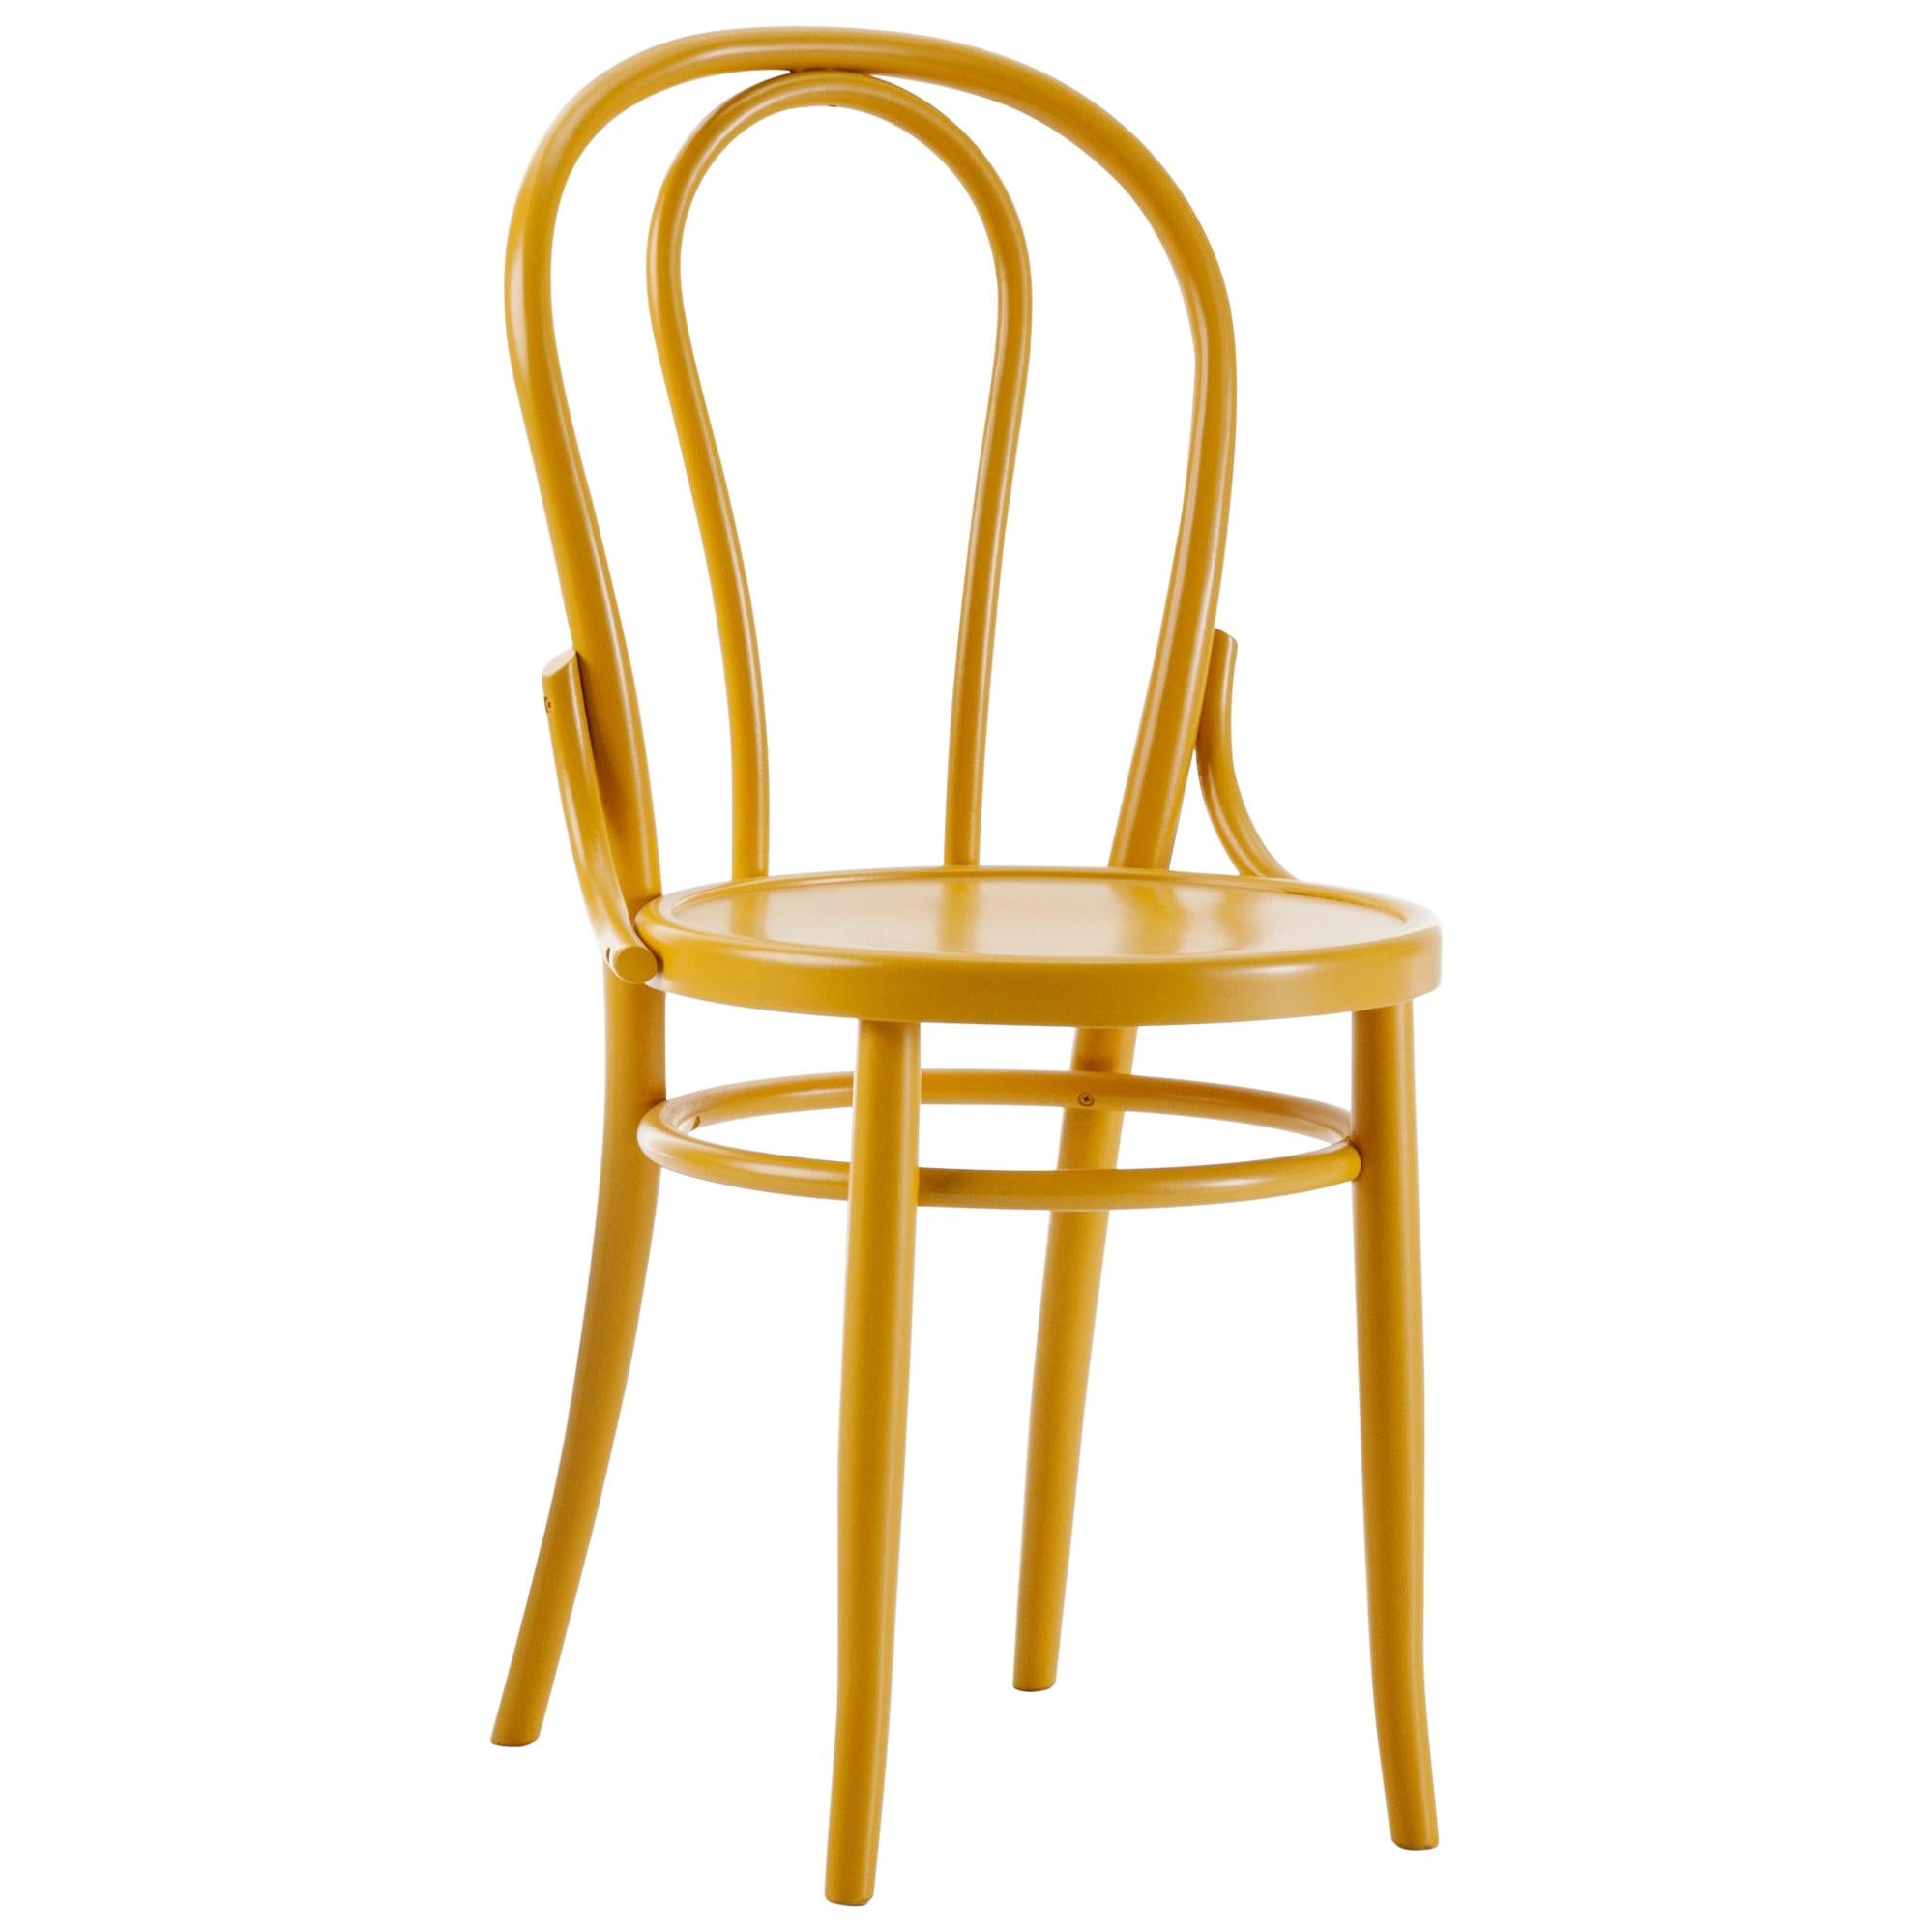 Gebrüder Thonet Vienna GmbH N.18 Chair in Yellow Ocre with Plywood Seat